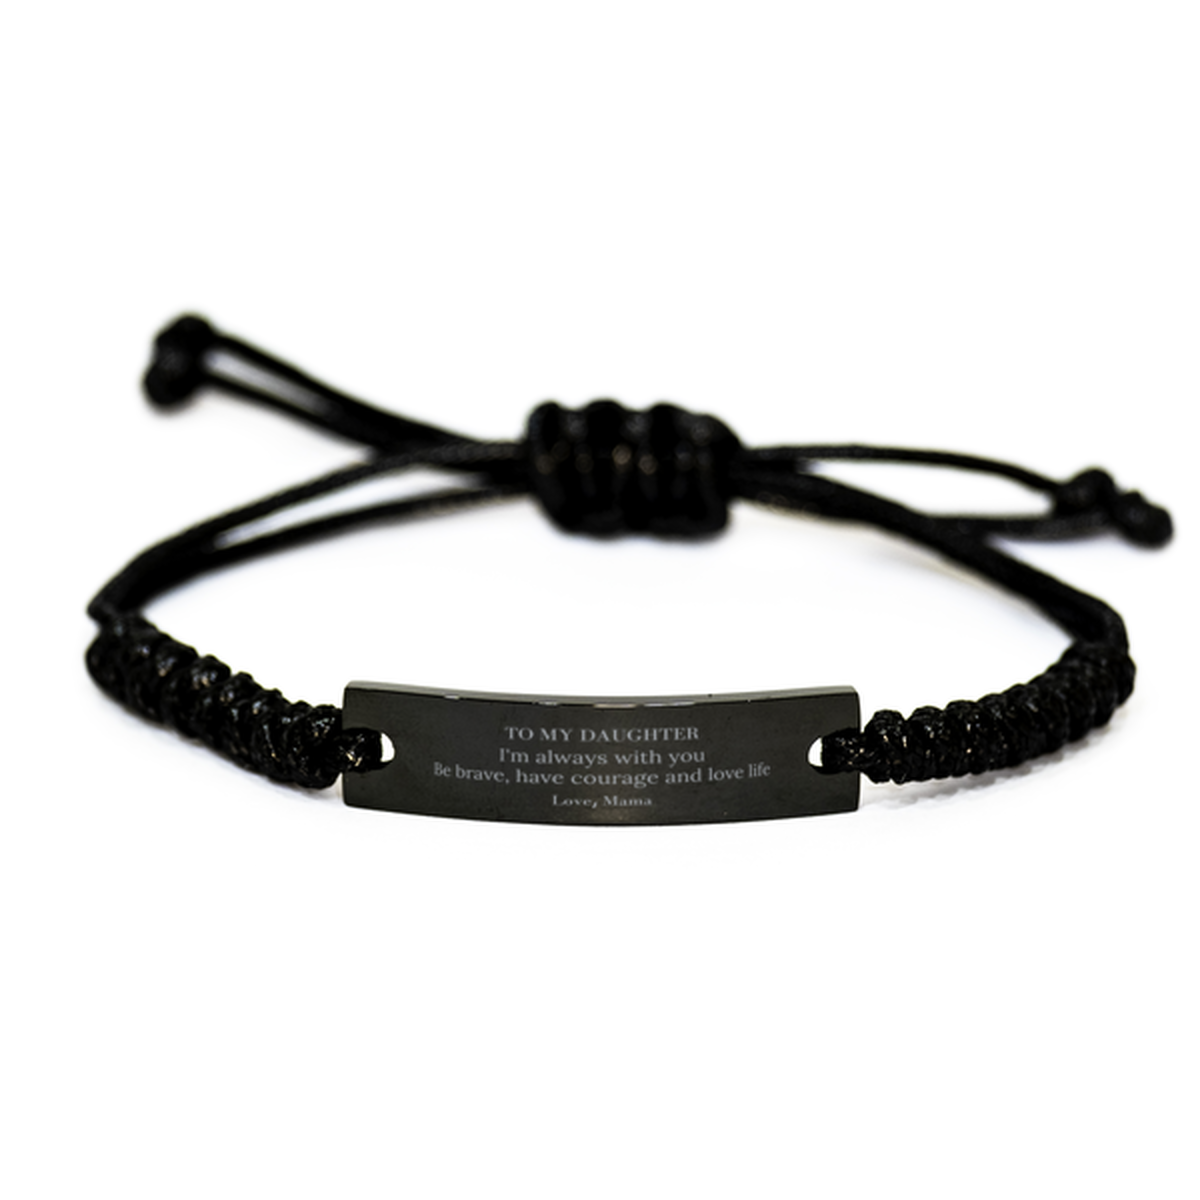 To My Daughter Gifts from Mama, Unique Black Rope Bracelet Inspirational Christmas Birthday Graduation Gifts for Daughter I'm always with you. Be brave, have courage and love life. Love, Mama